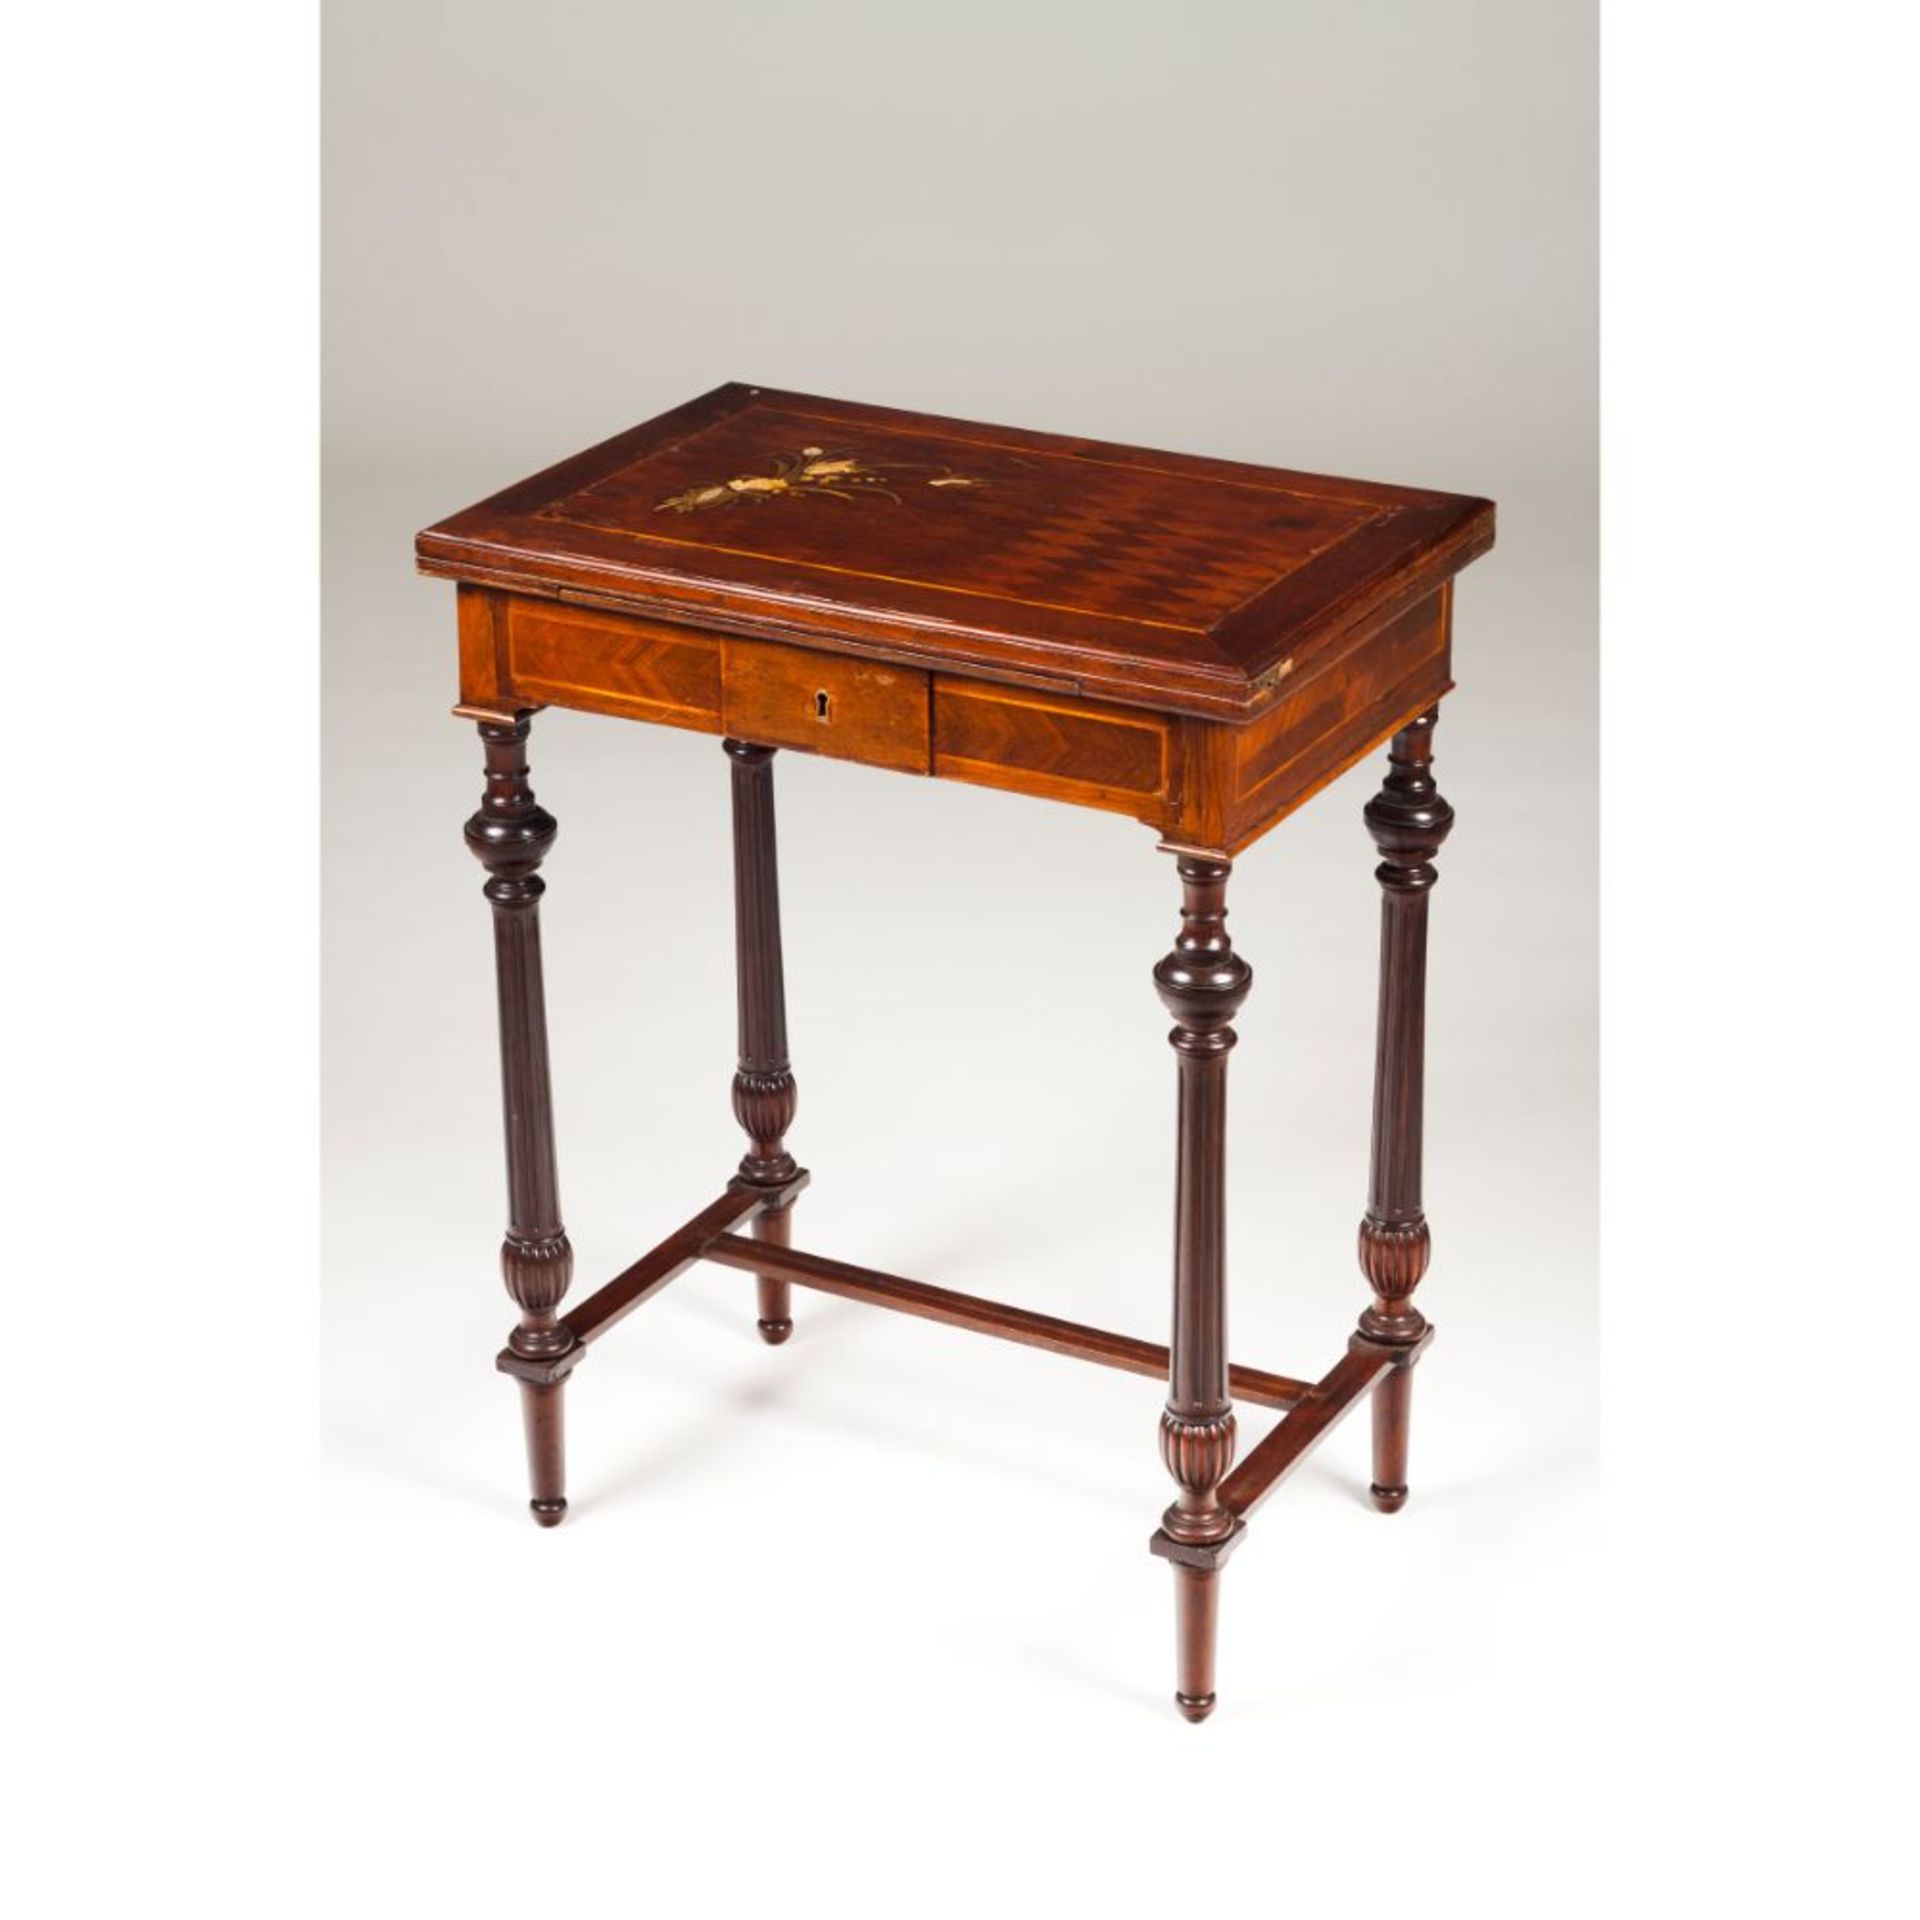 A small Napoleon III card table, Mahogany, With two tops, one green lined and the other with leather